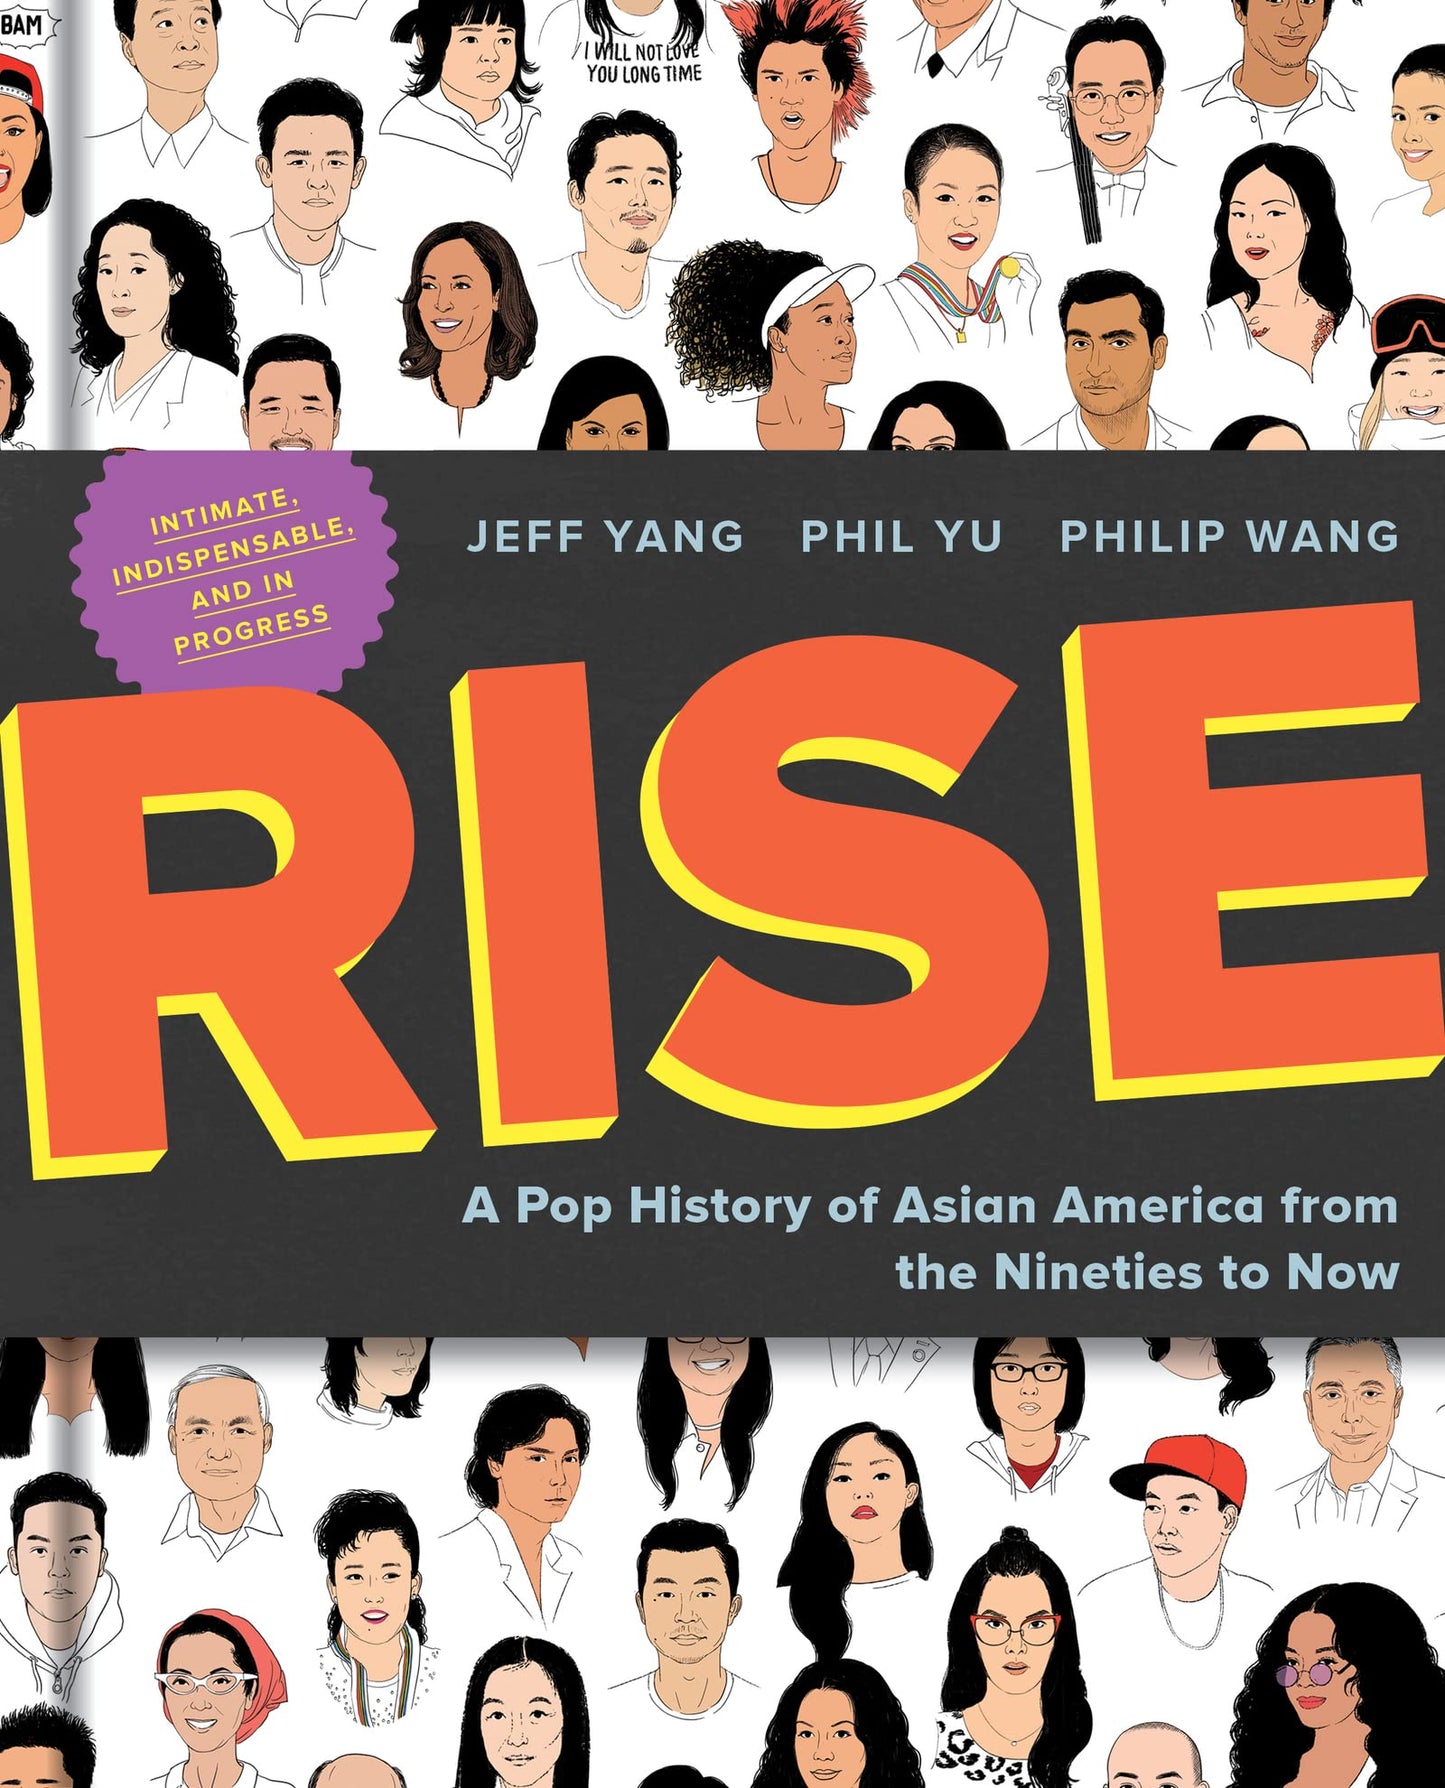 Rise // A Pop History of Asian America from the Nineties to Now